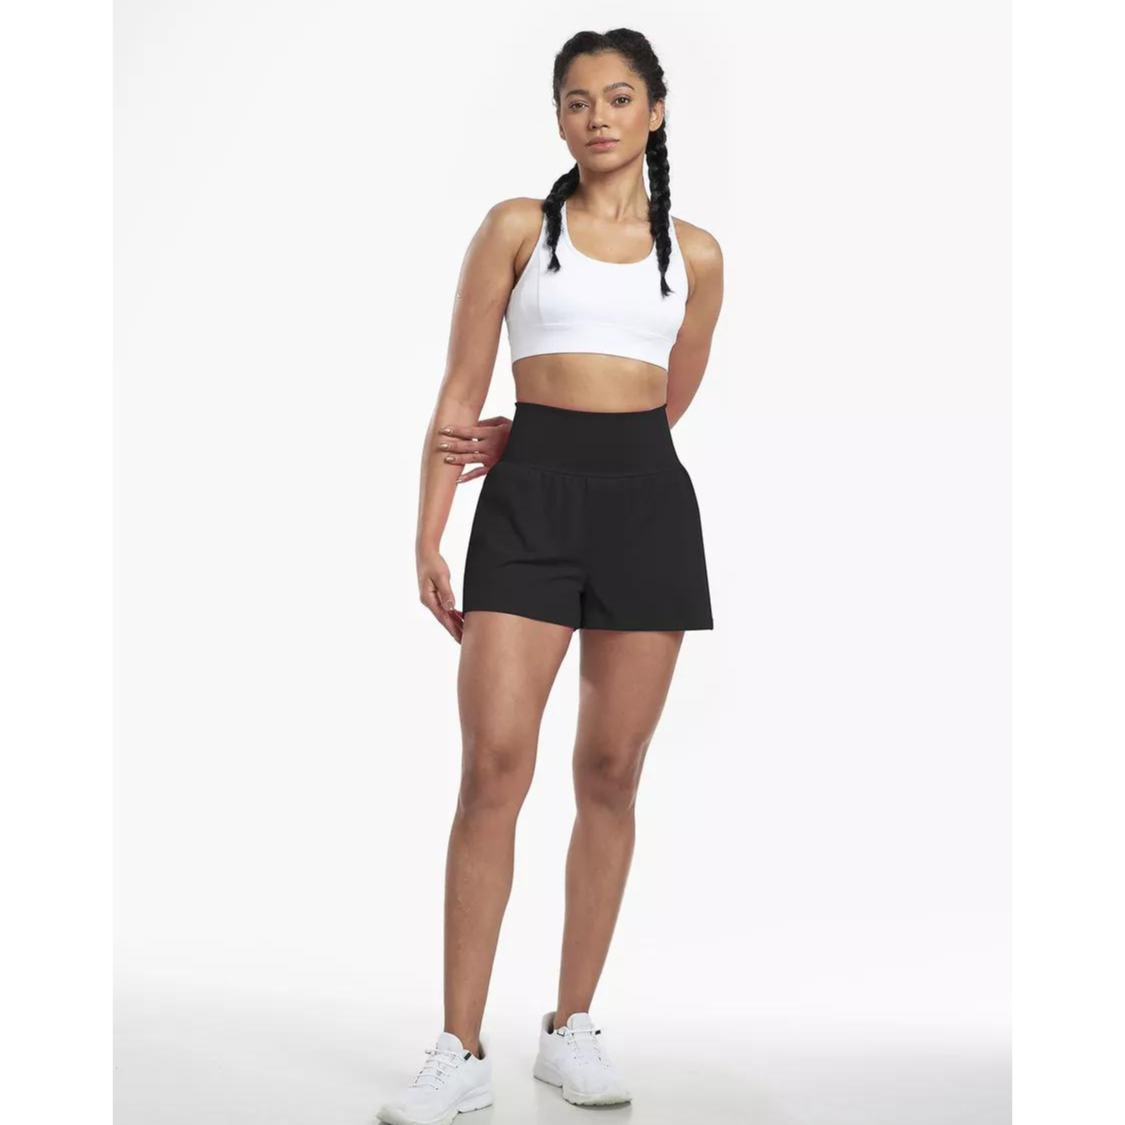 High Waisted 2-in-1 Yoga Shorts with Back and Side Pockets